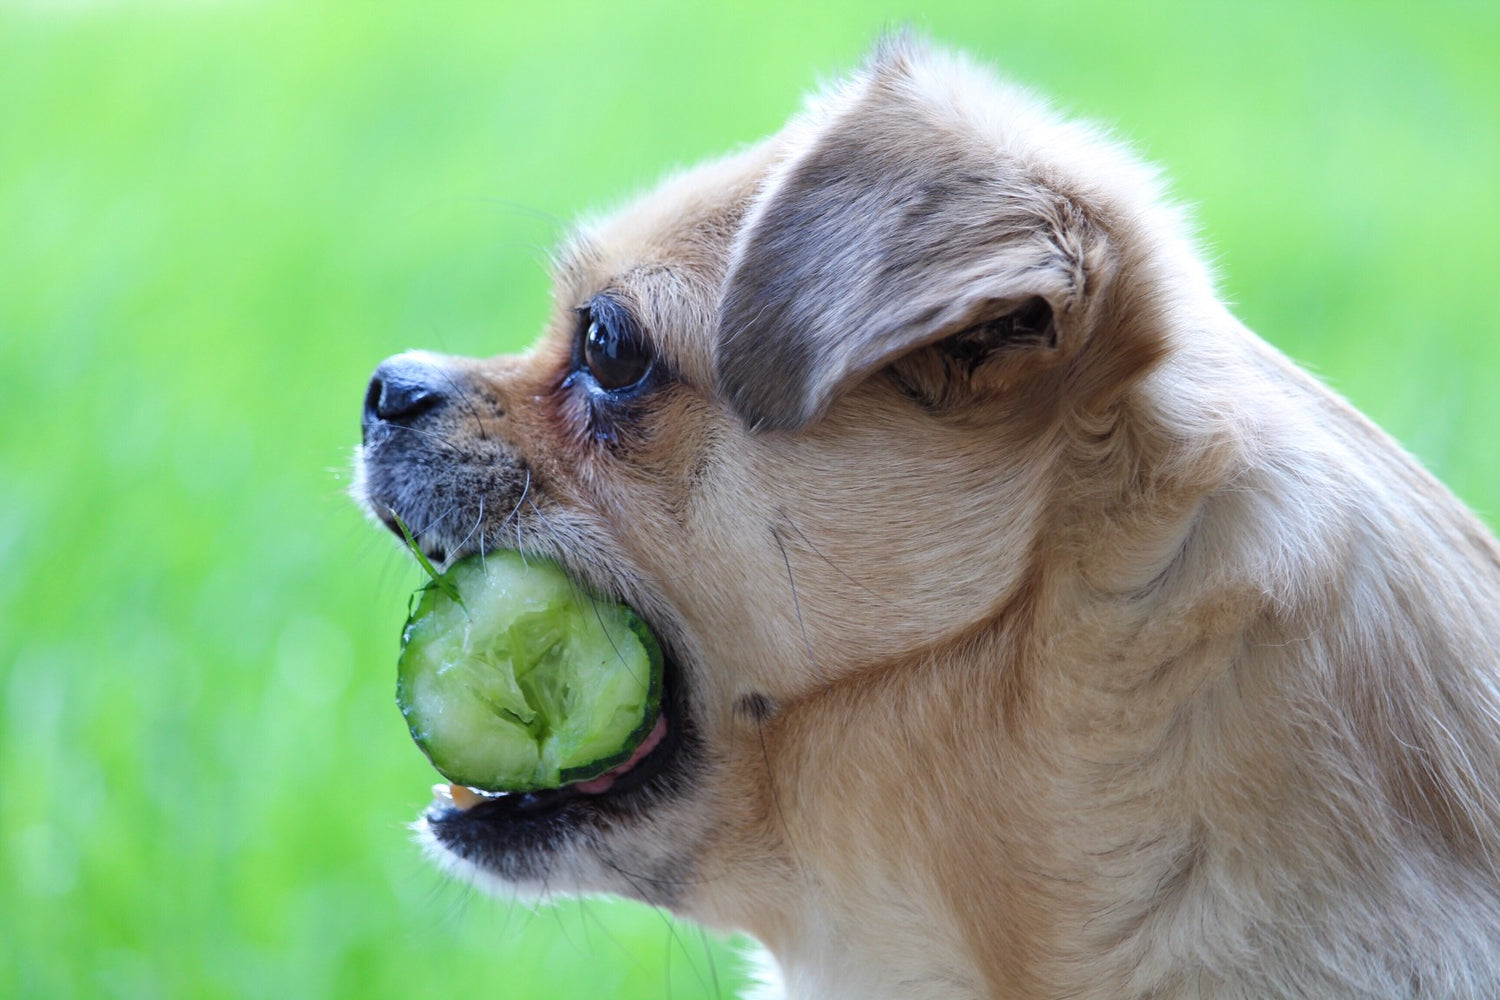 Foods You Can Share With Your Dog